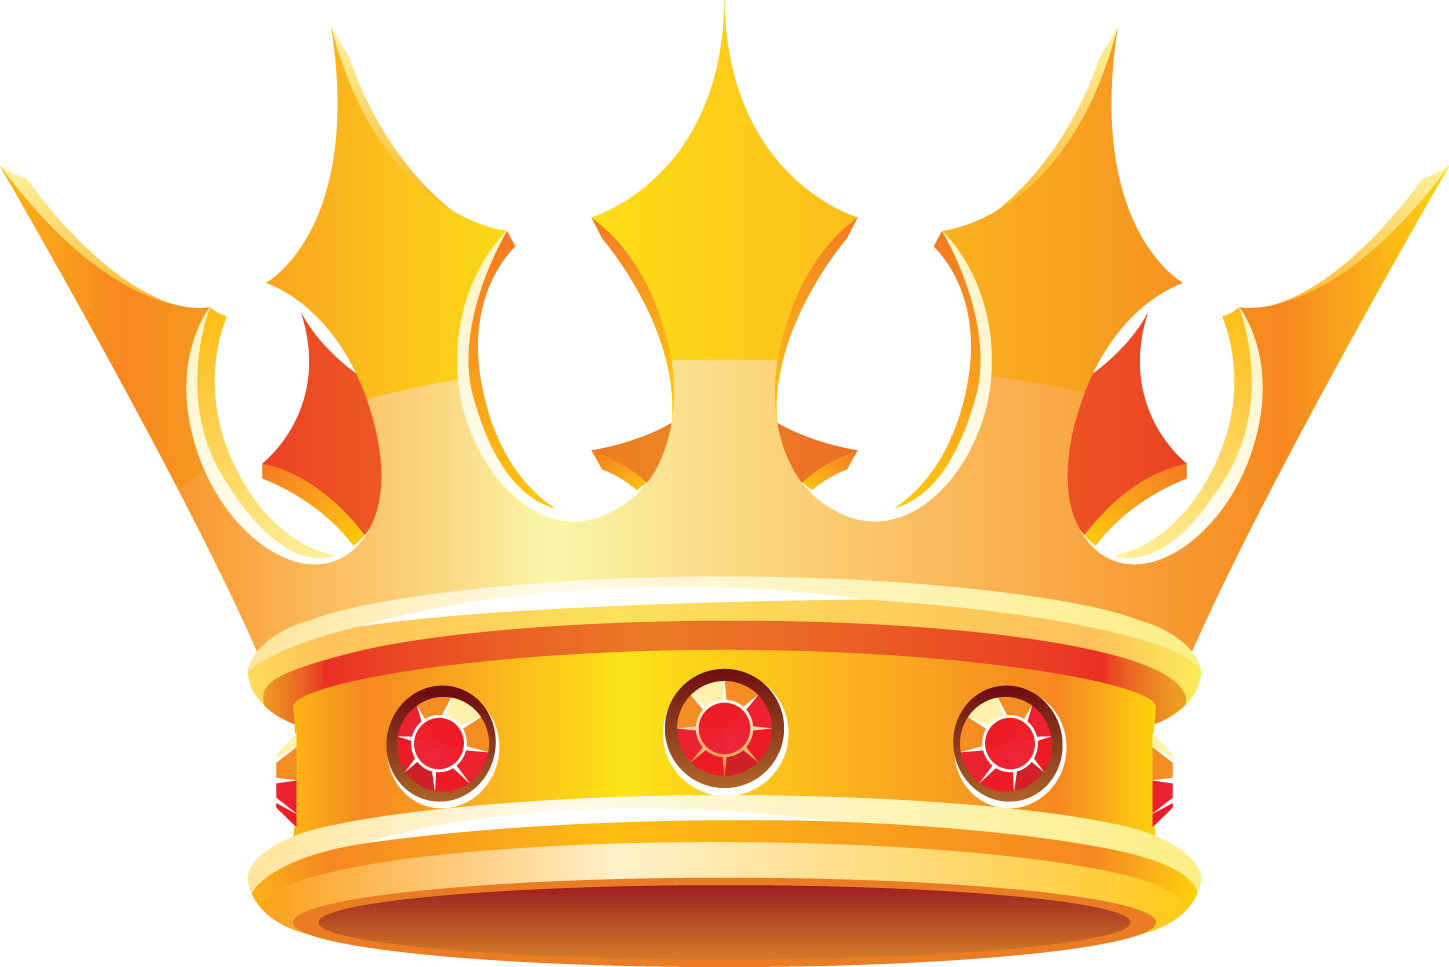 King And Queen Crowns Clipart | Clipart library - Free Clipart Images